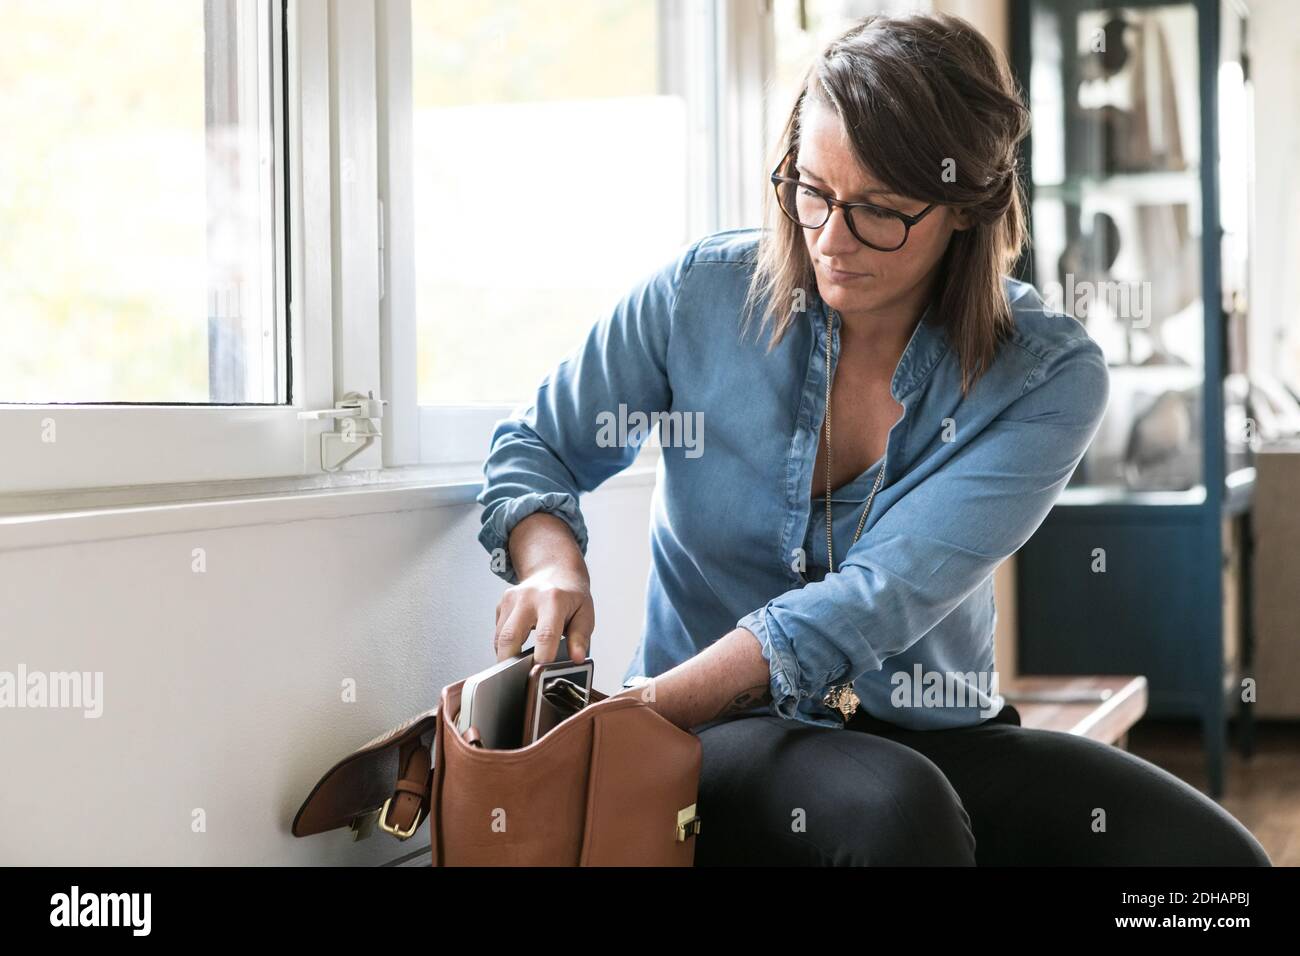 Businesswoman removing laptop from bag while sitting on bench in home office Stock Photo